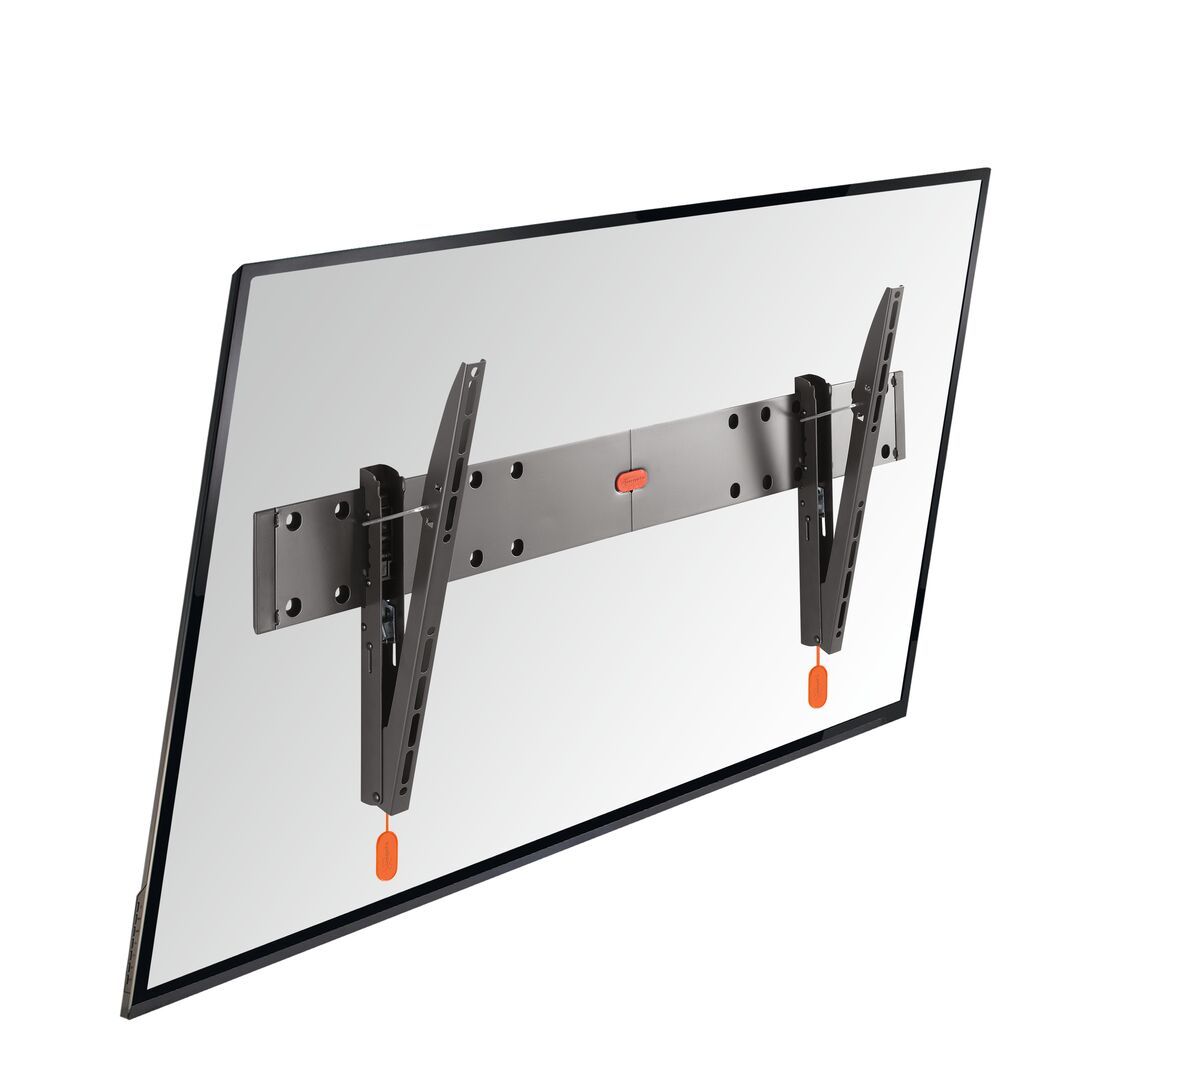 Vogel's BASE 15 L Tilting TV Wall Mount - Suitable for 40 up to 65 inch TVs up to Tilt up to 15° - Product